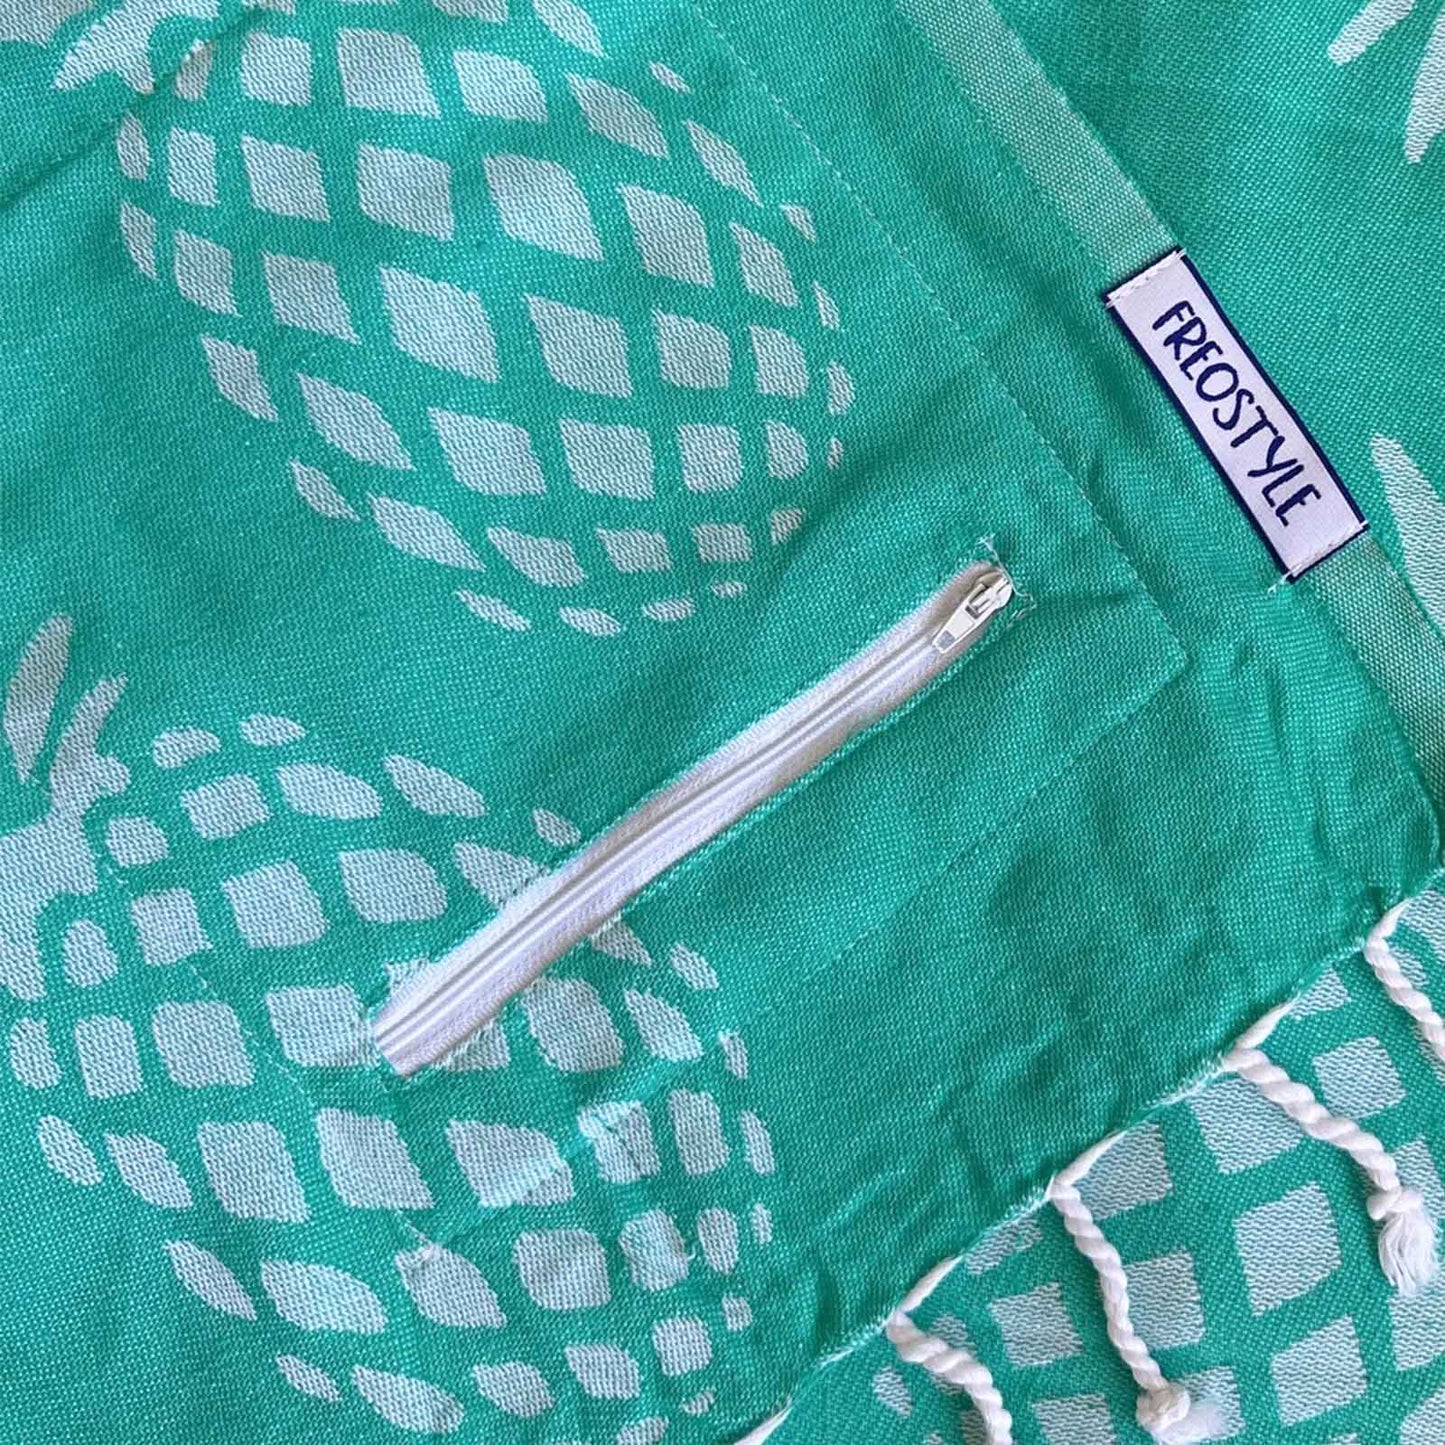 Pineapple Mint Turkish Towel with Pockets by Freostyle, close up of pocket